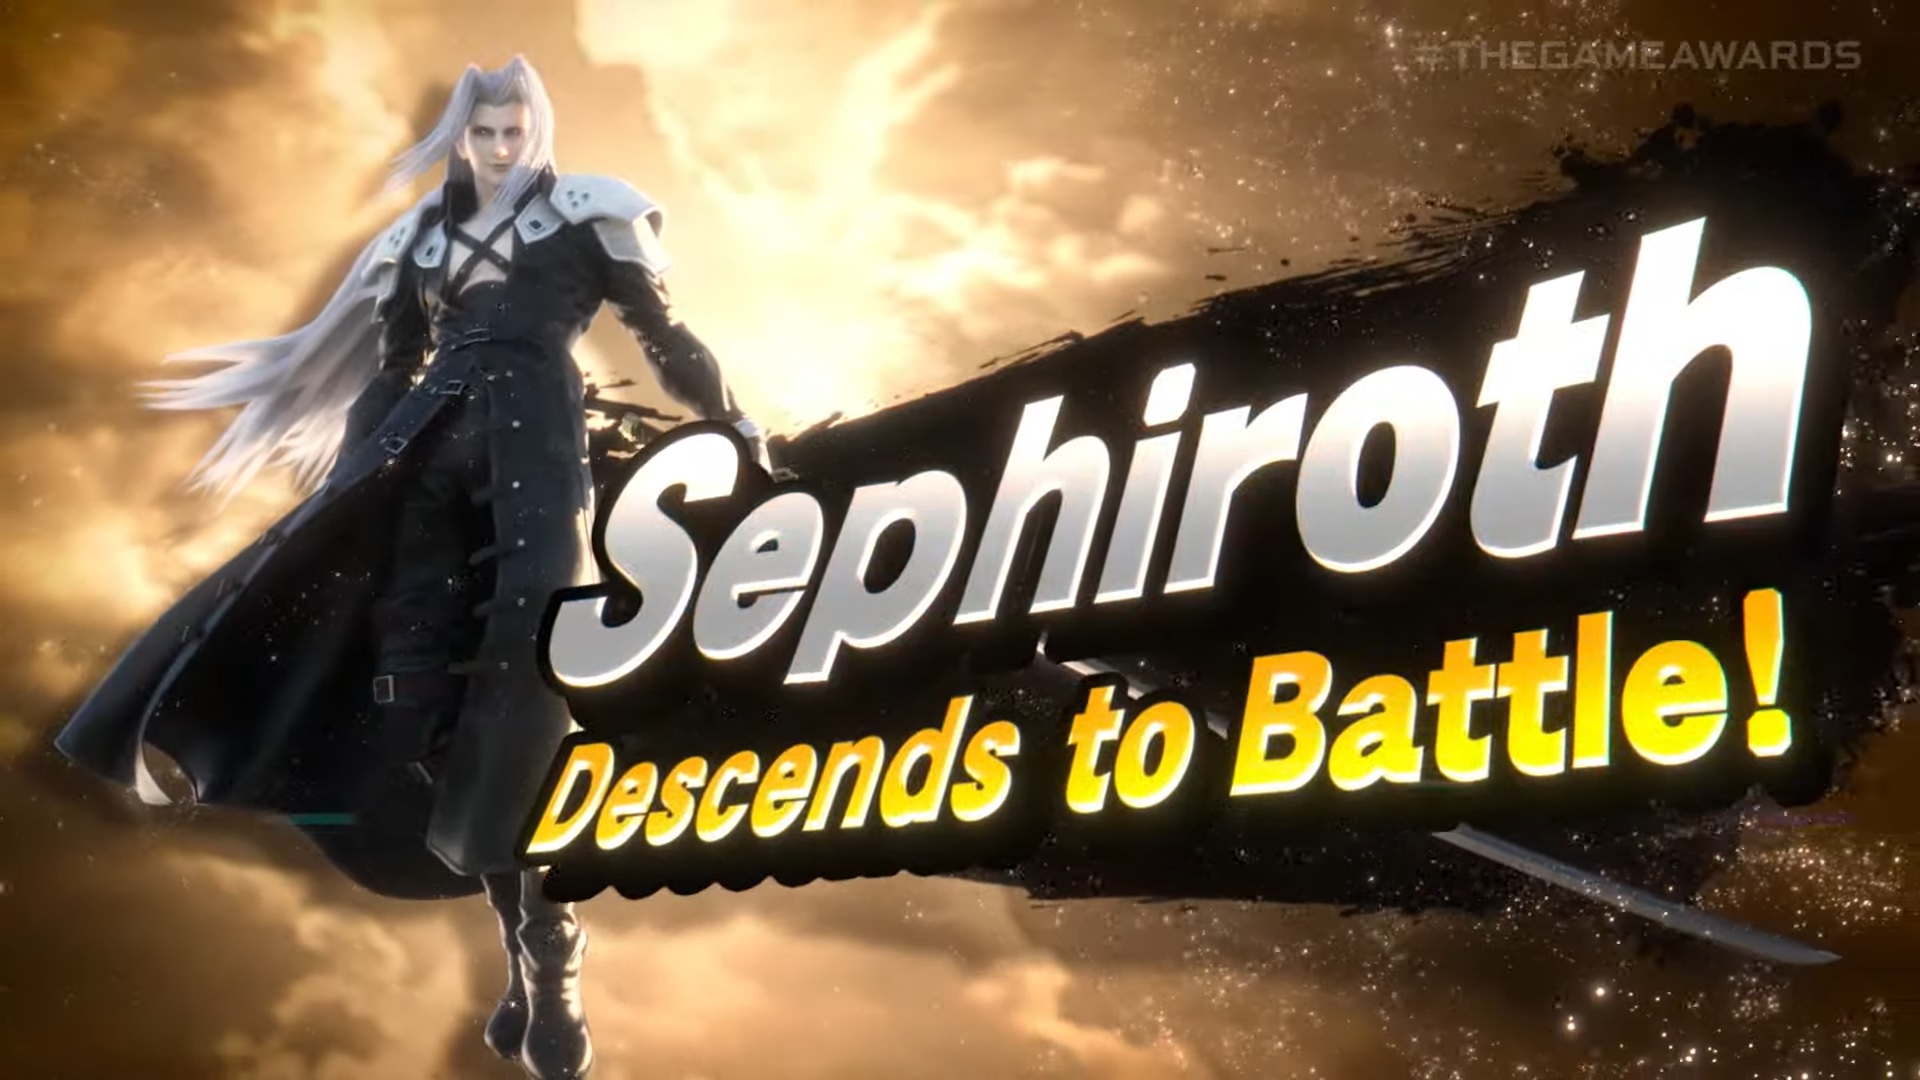 Mario & Luigi Could Beat Sephiroth - Here's Why